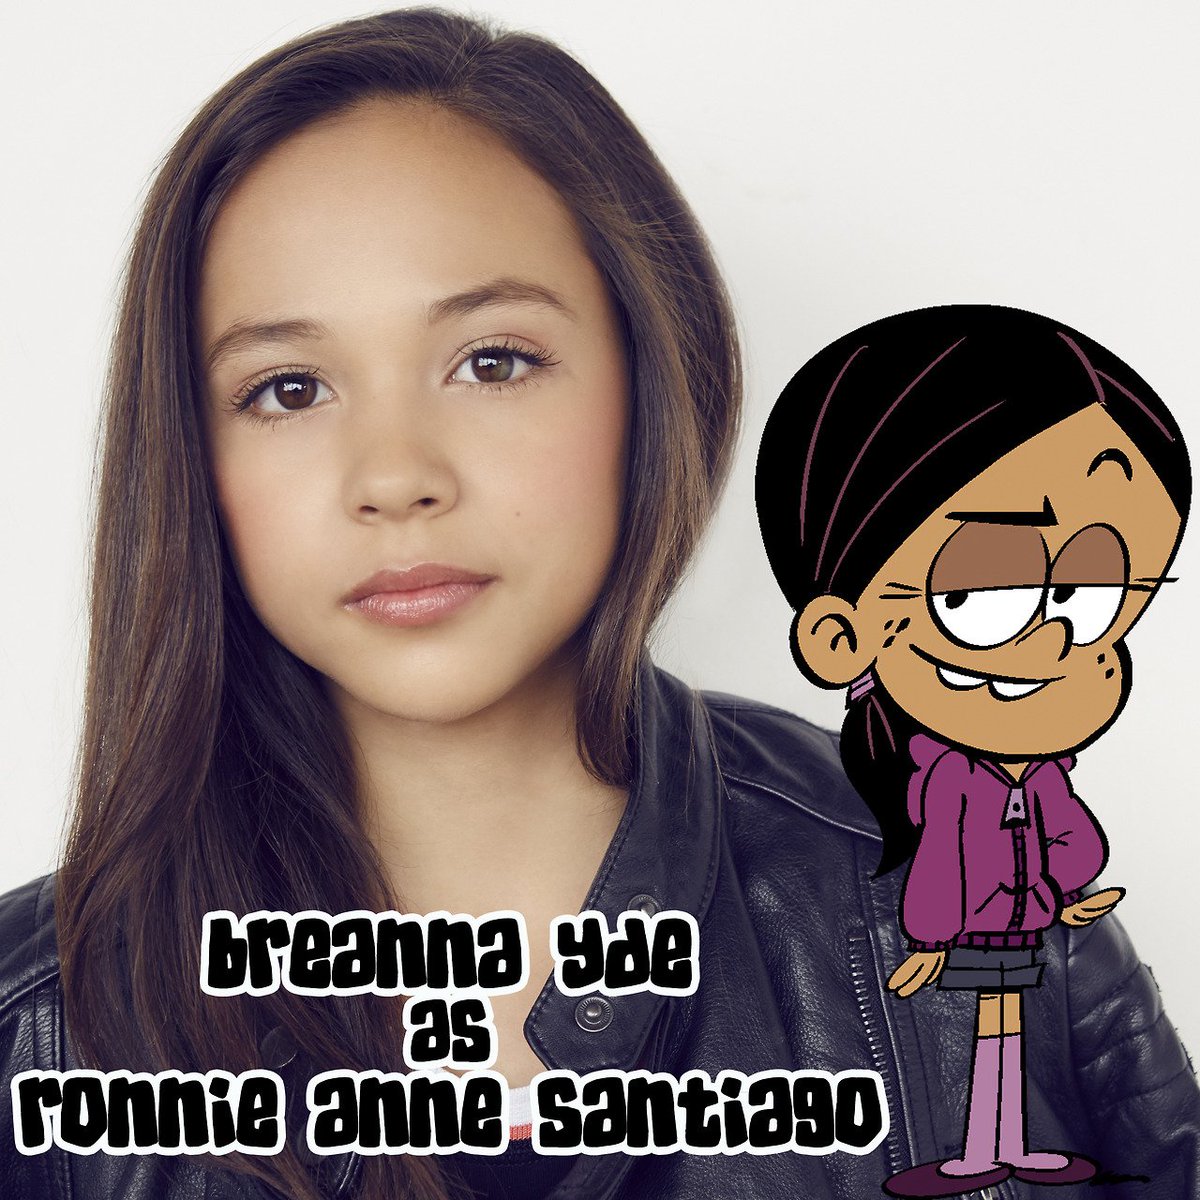 #theloudhouse #thereallyloudhouse If Ronnie Anne were to appear in the live-action series, She should be played by Breanna Yde.